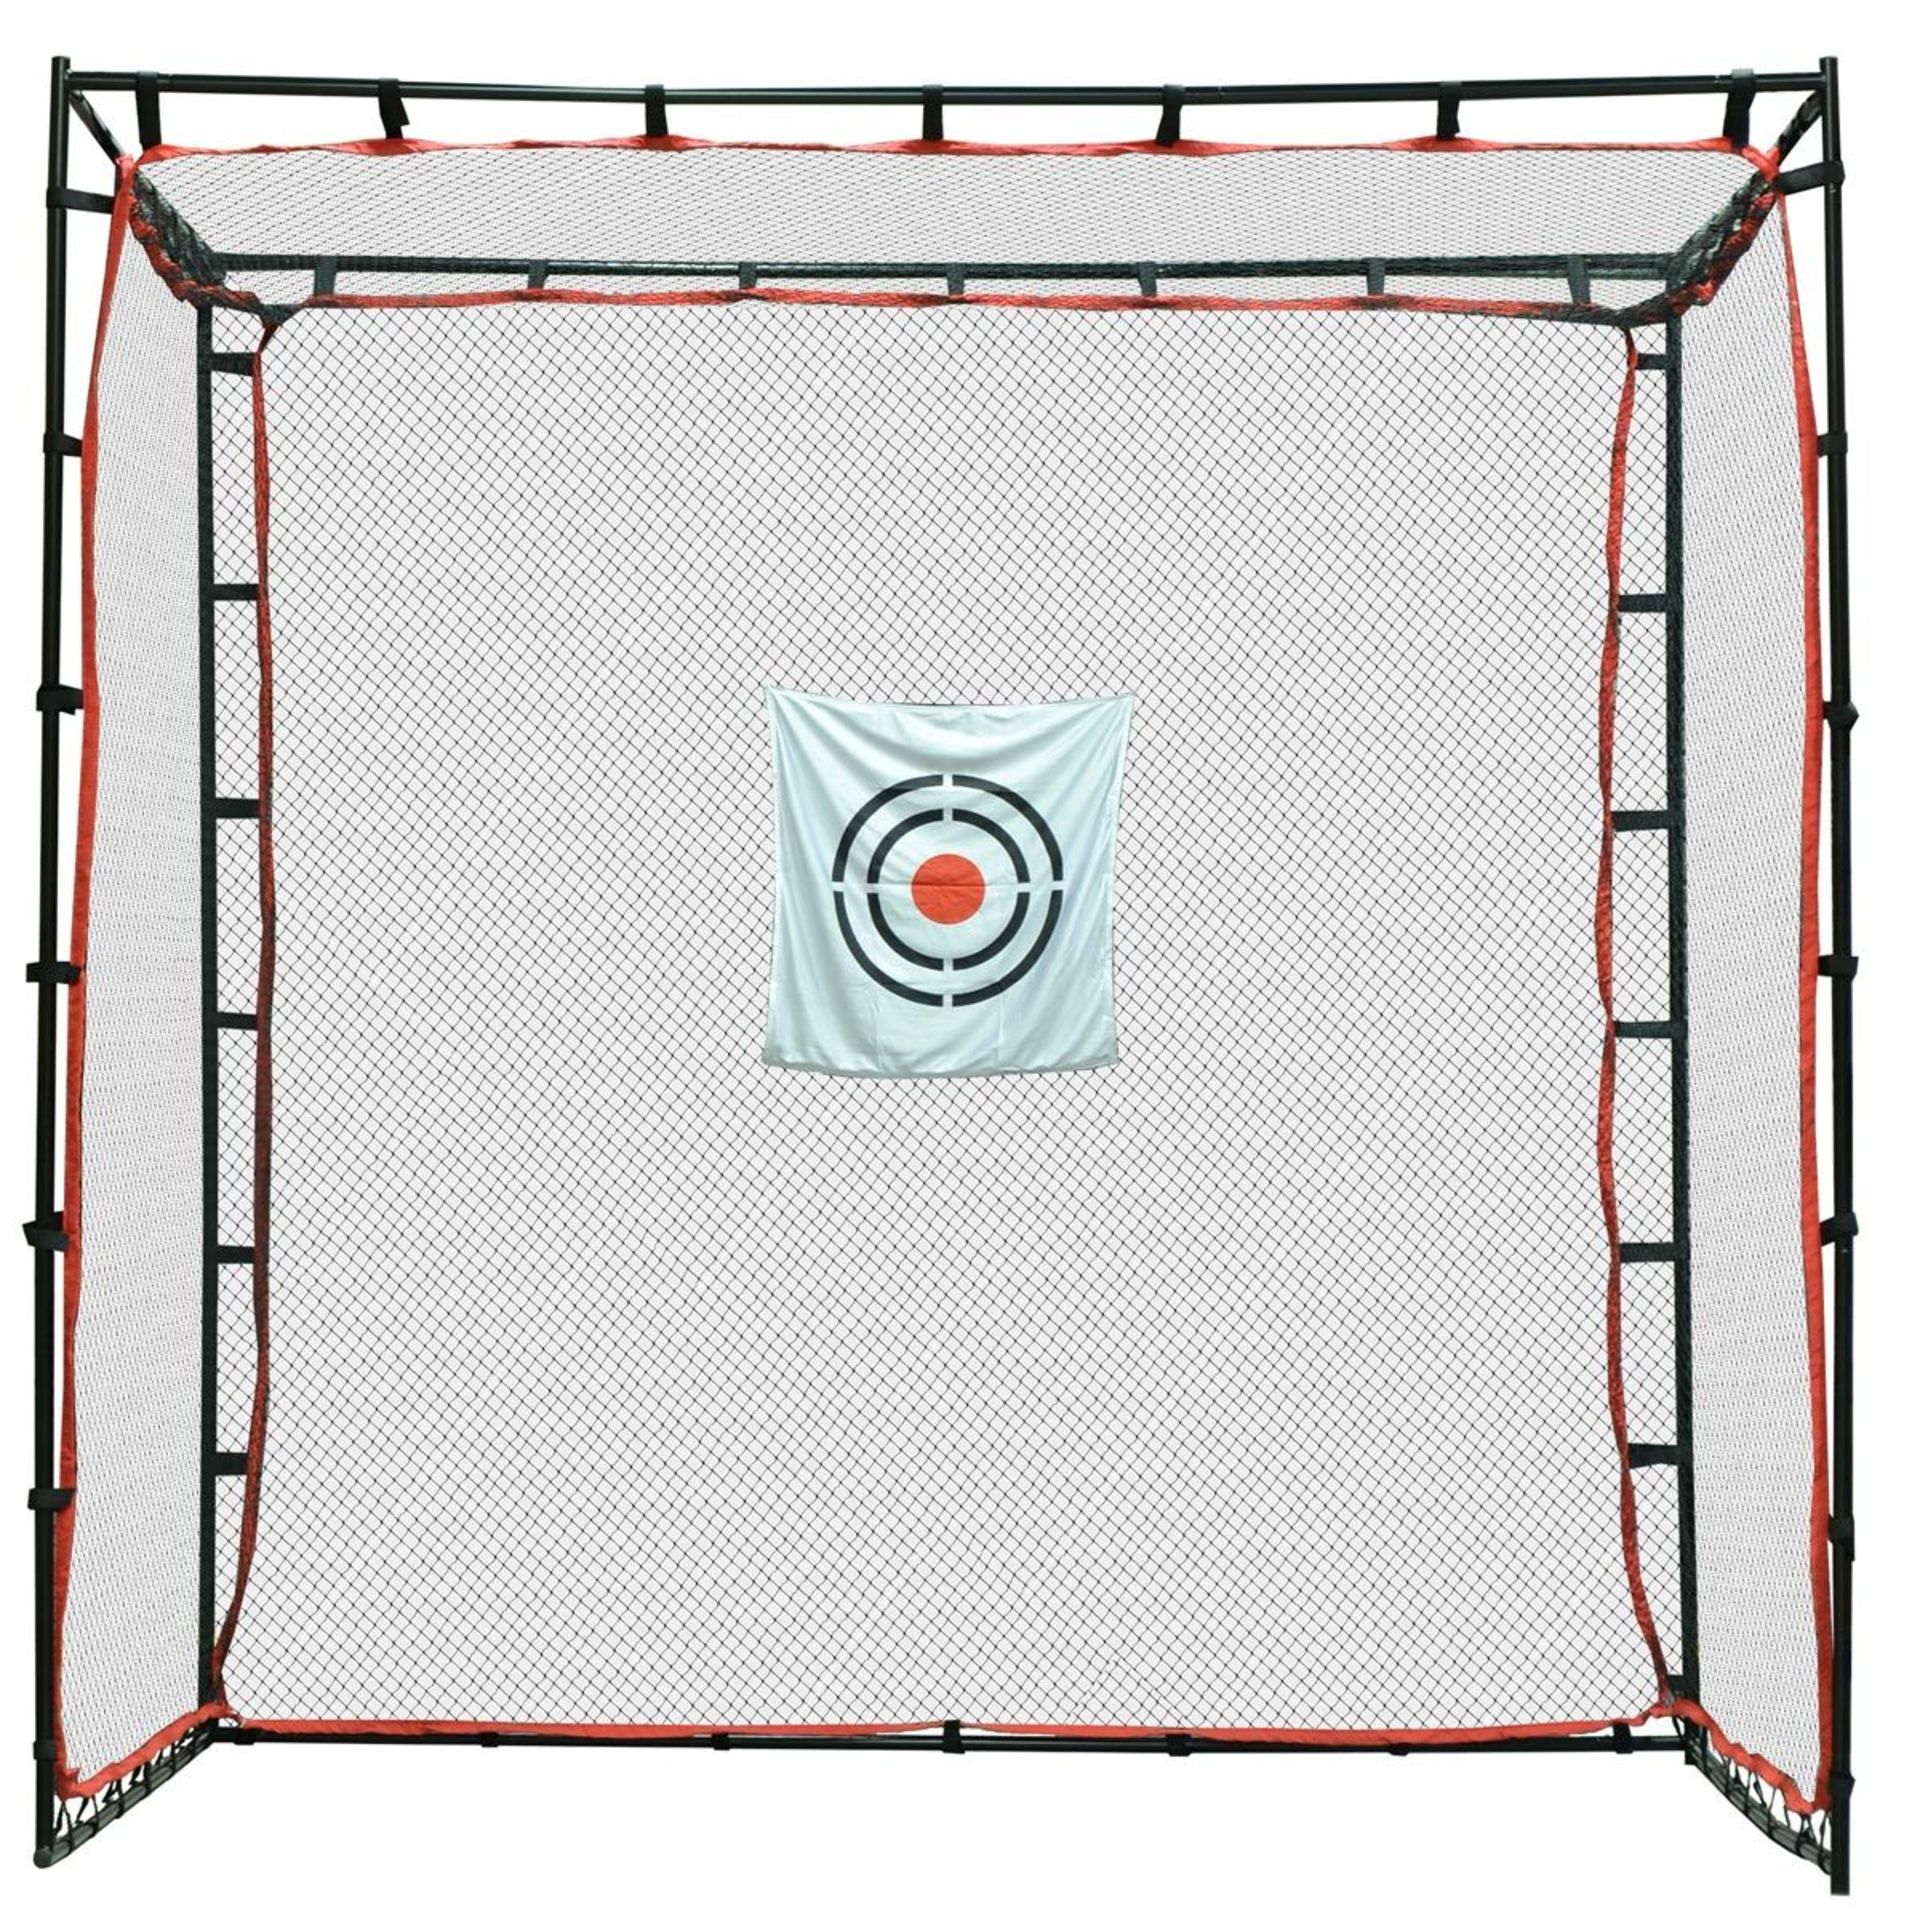 1 BOXED PRO ADVANCED MASTER CAGE SPORTS NET RRP Â£399